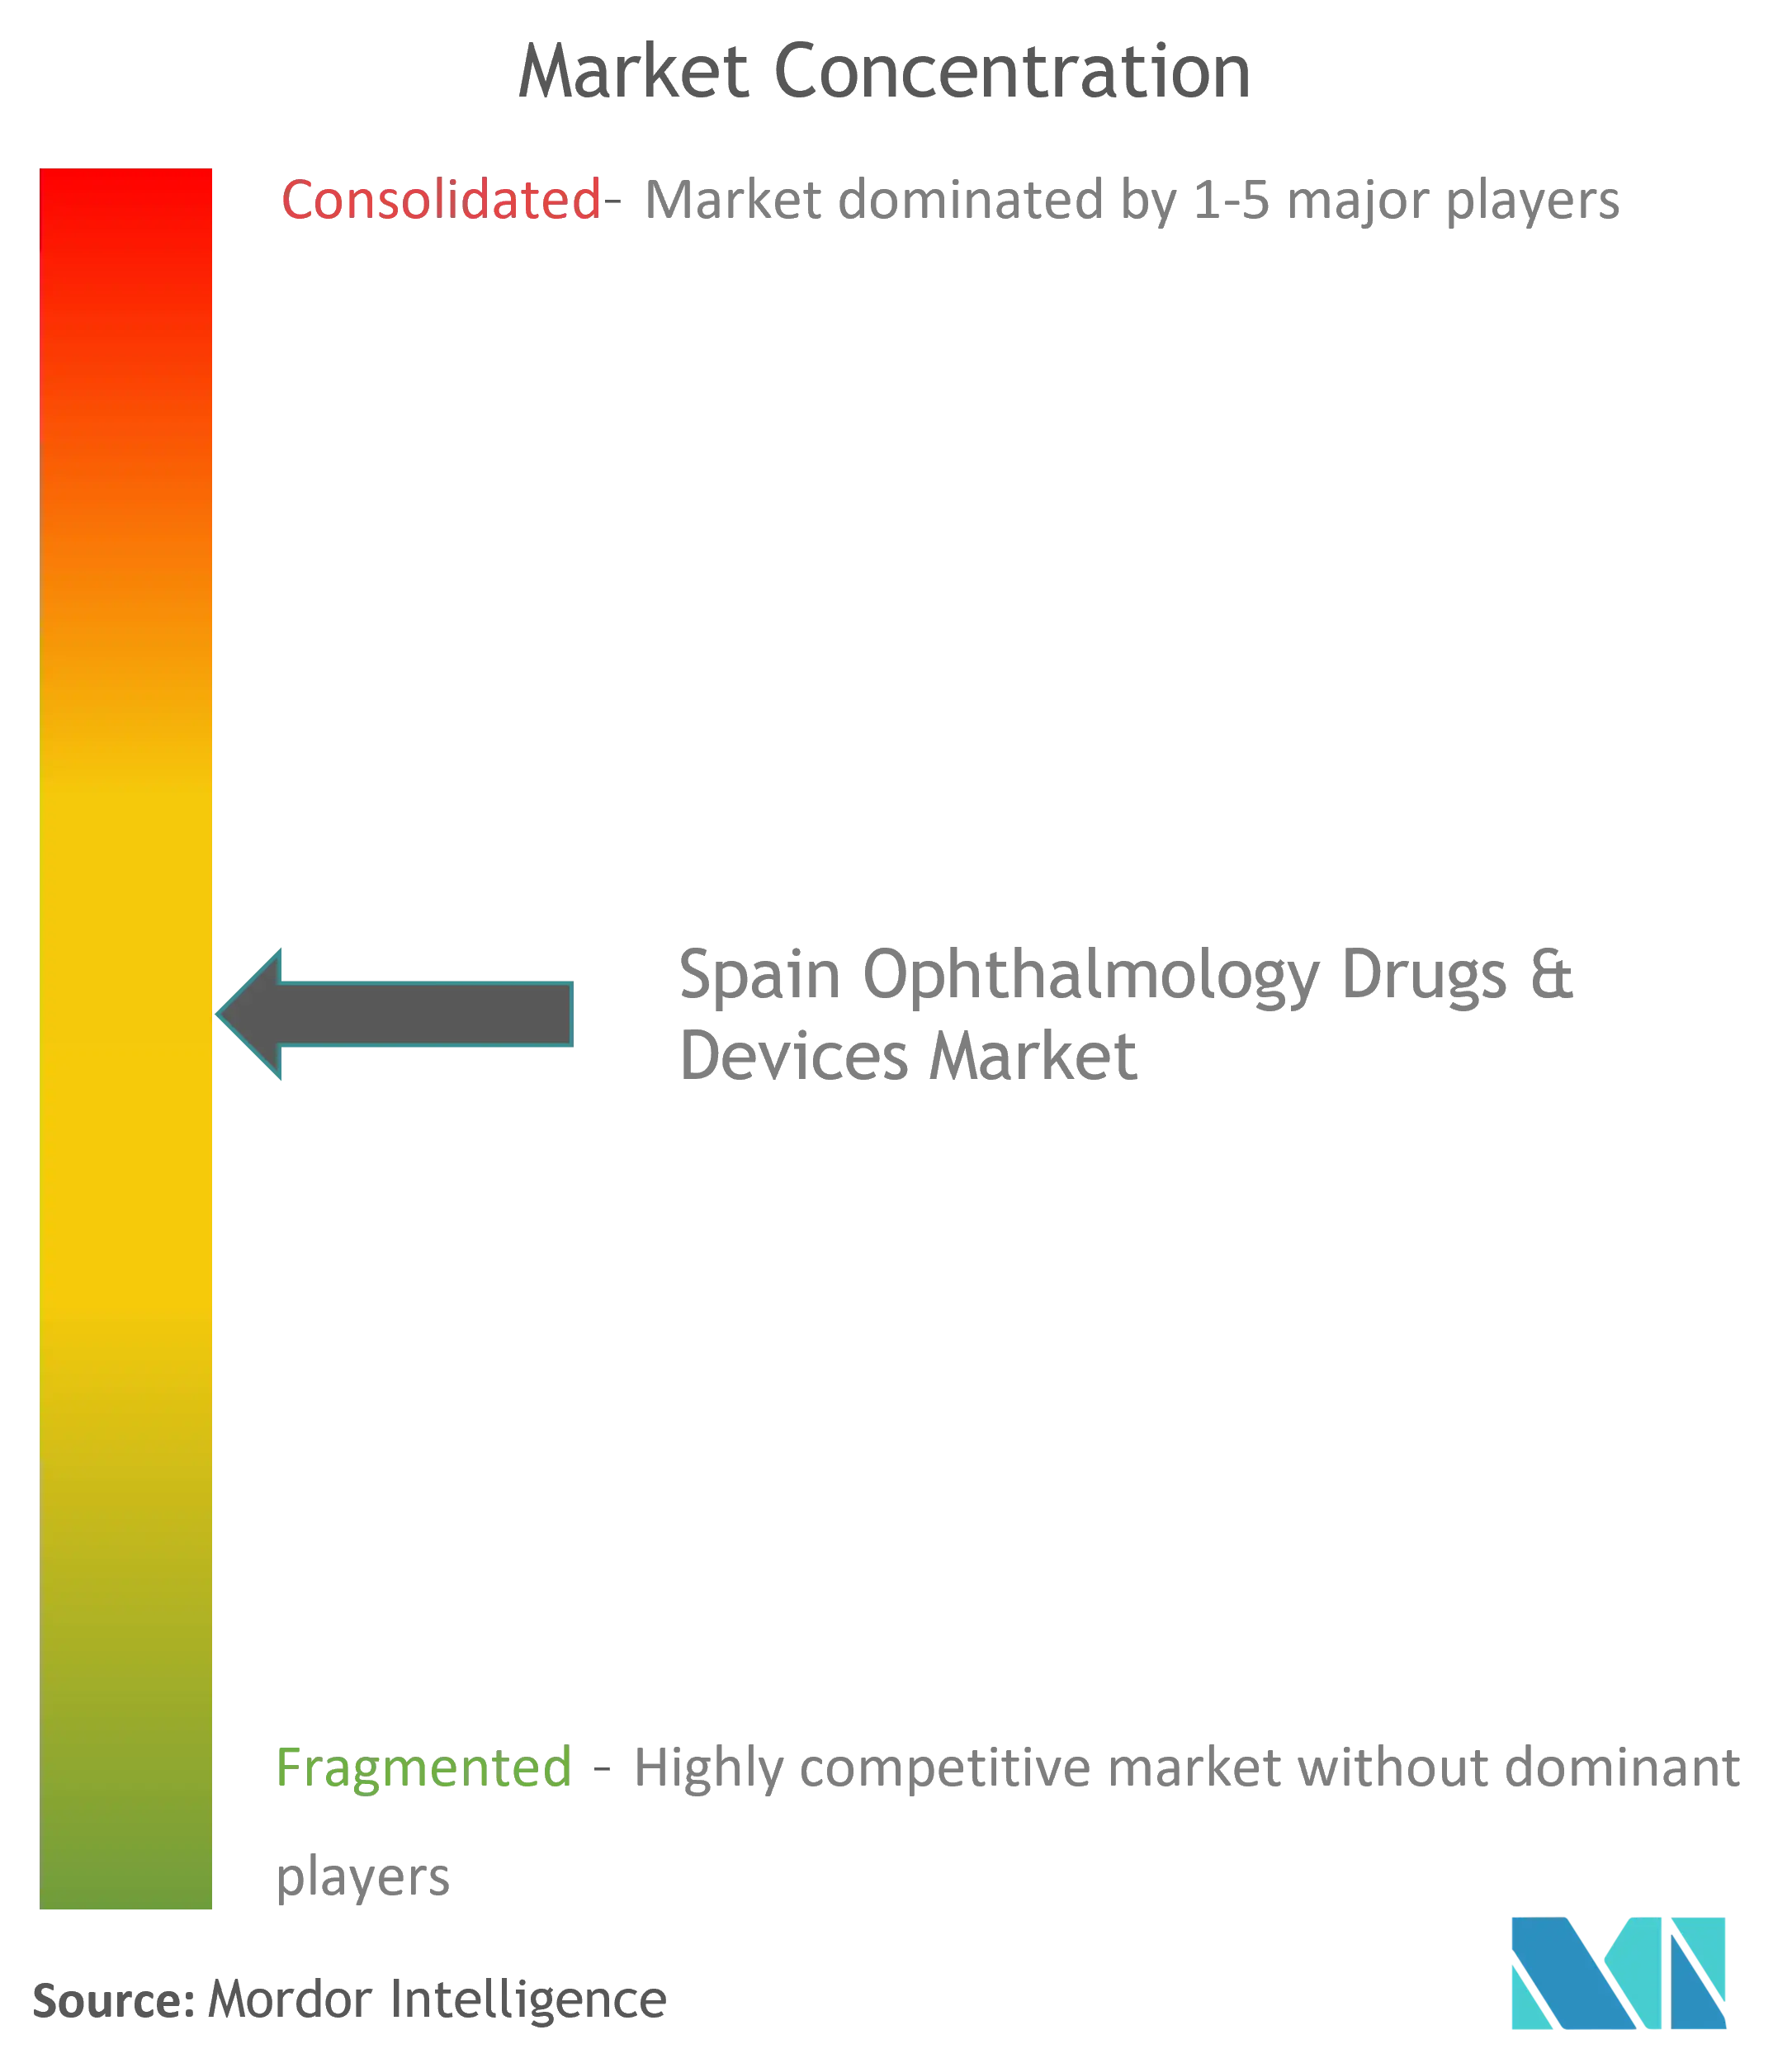 Spain Ophthalmology Drugs & Devices Market Concentration